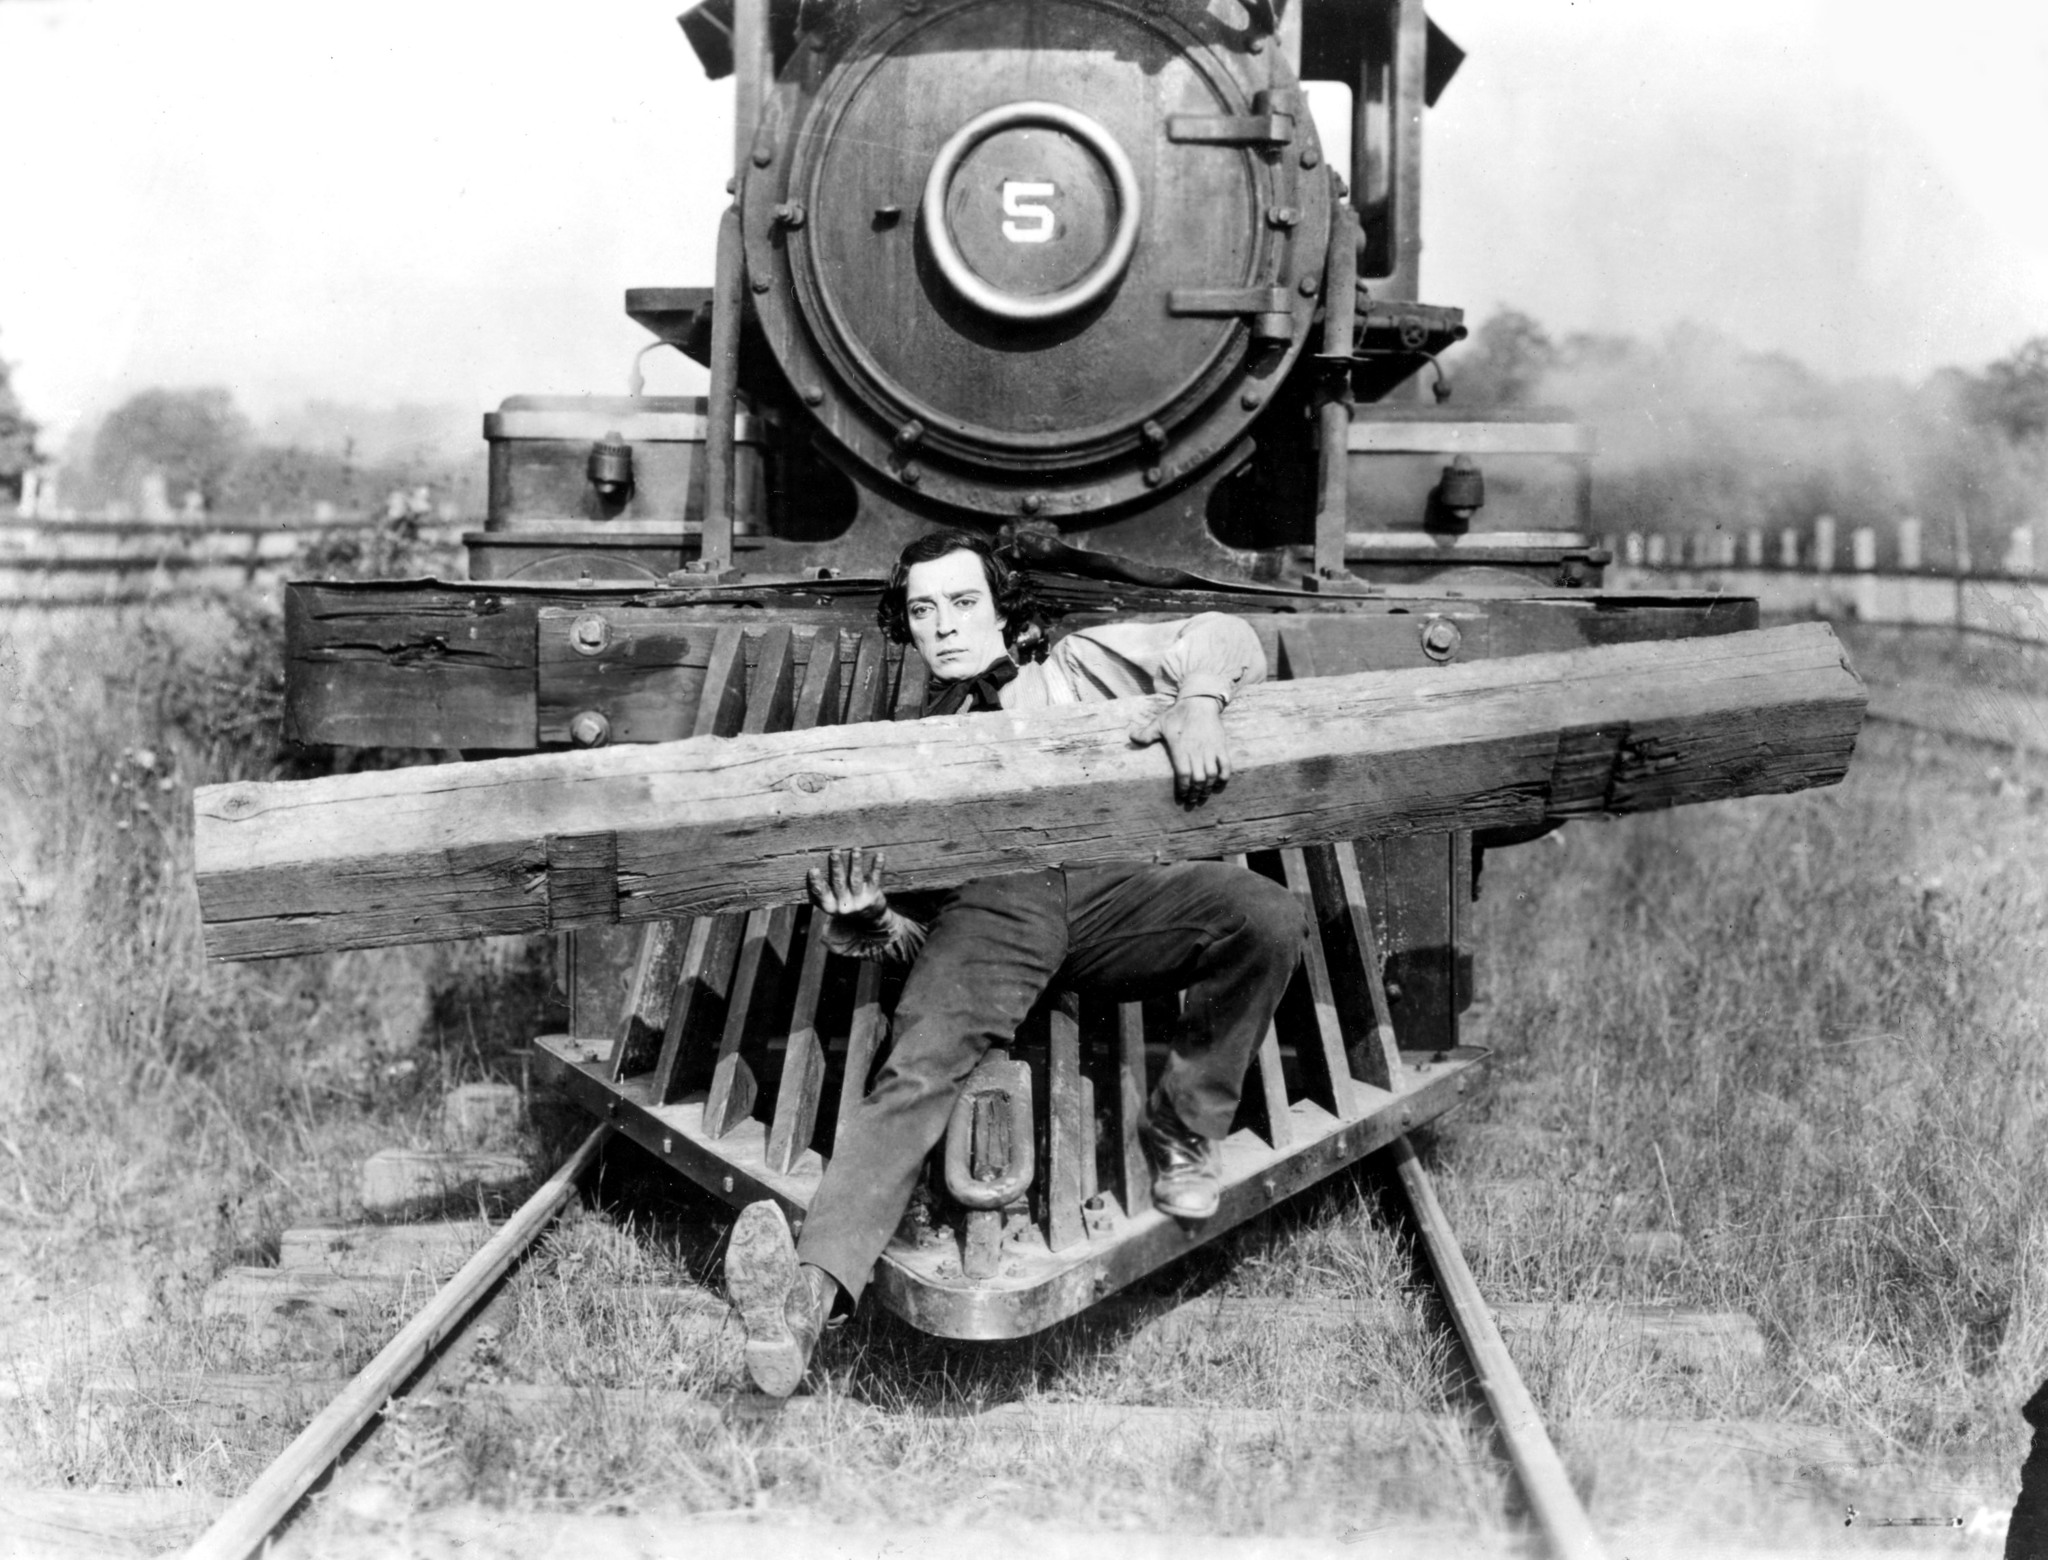 Buster Keaton in The General (1926)